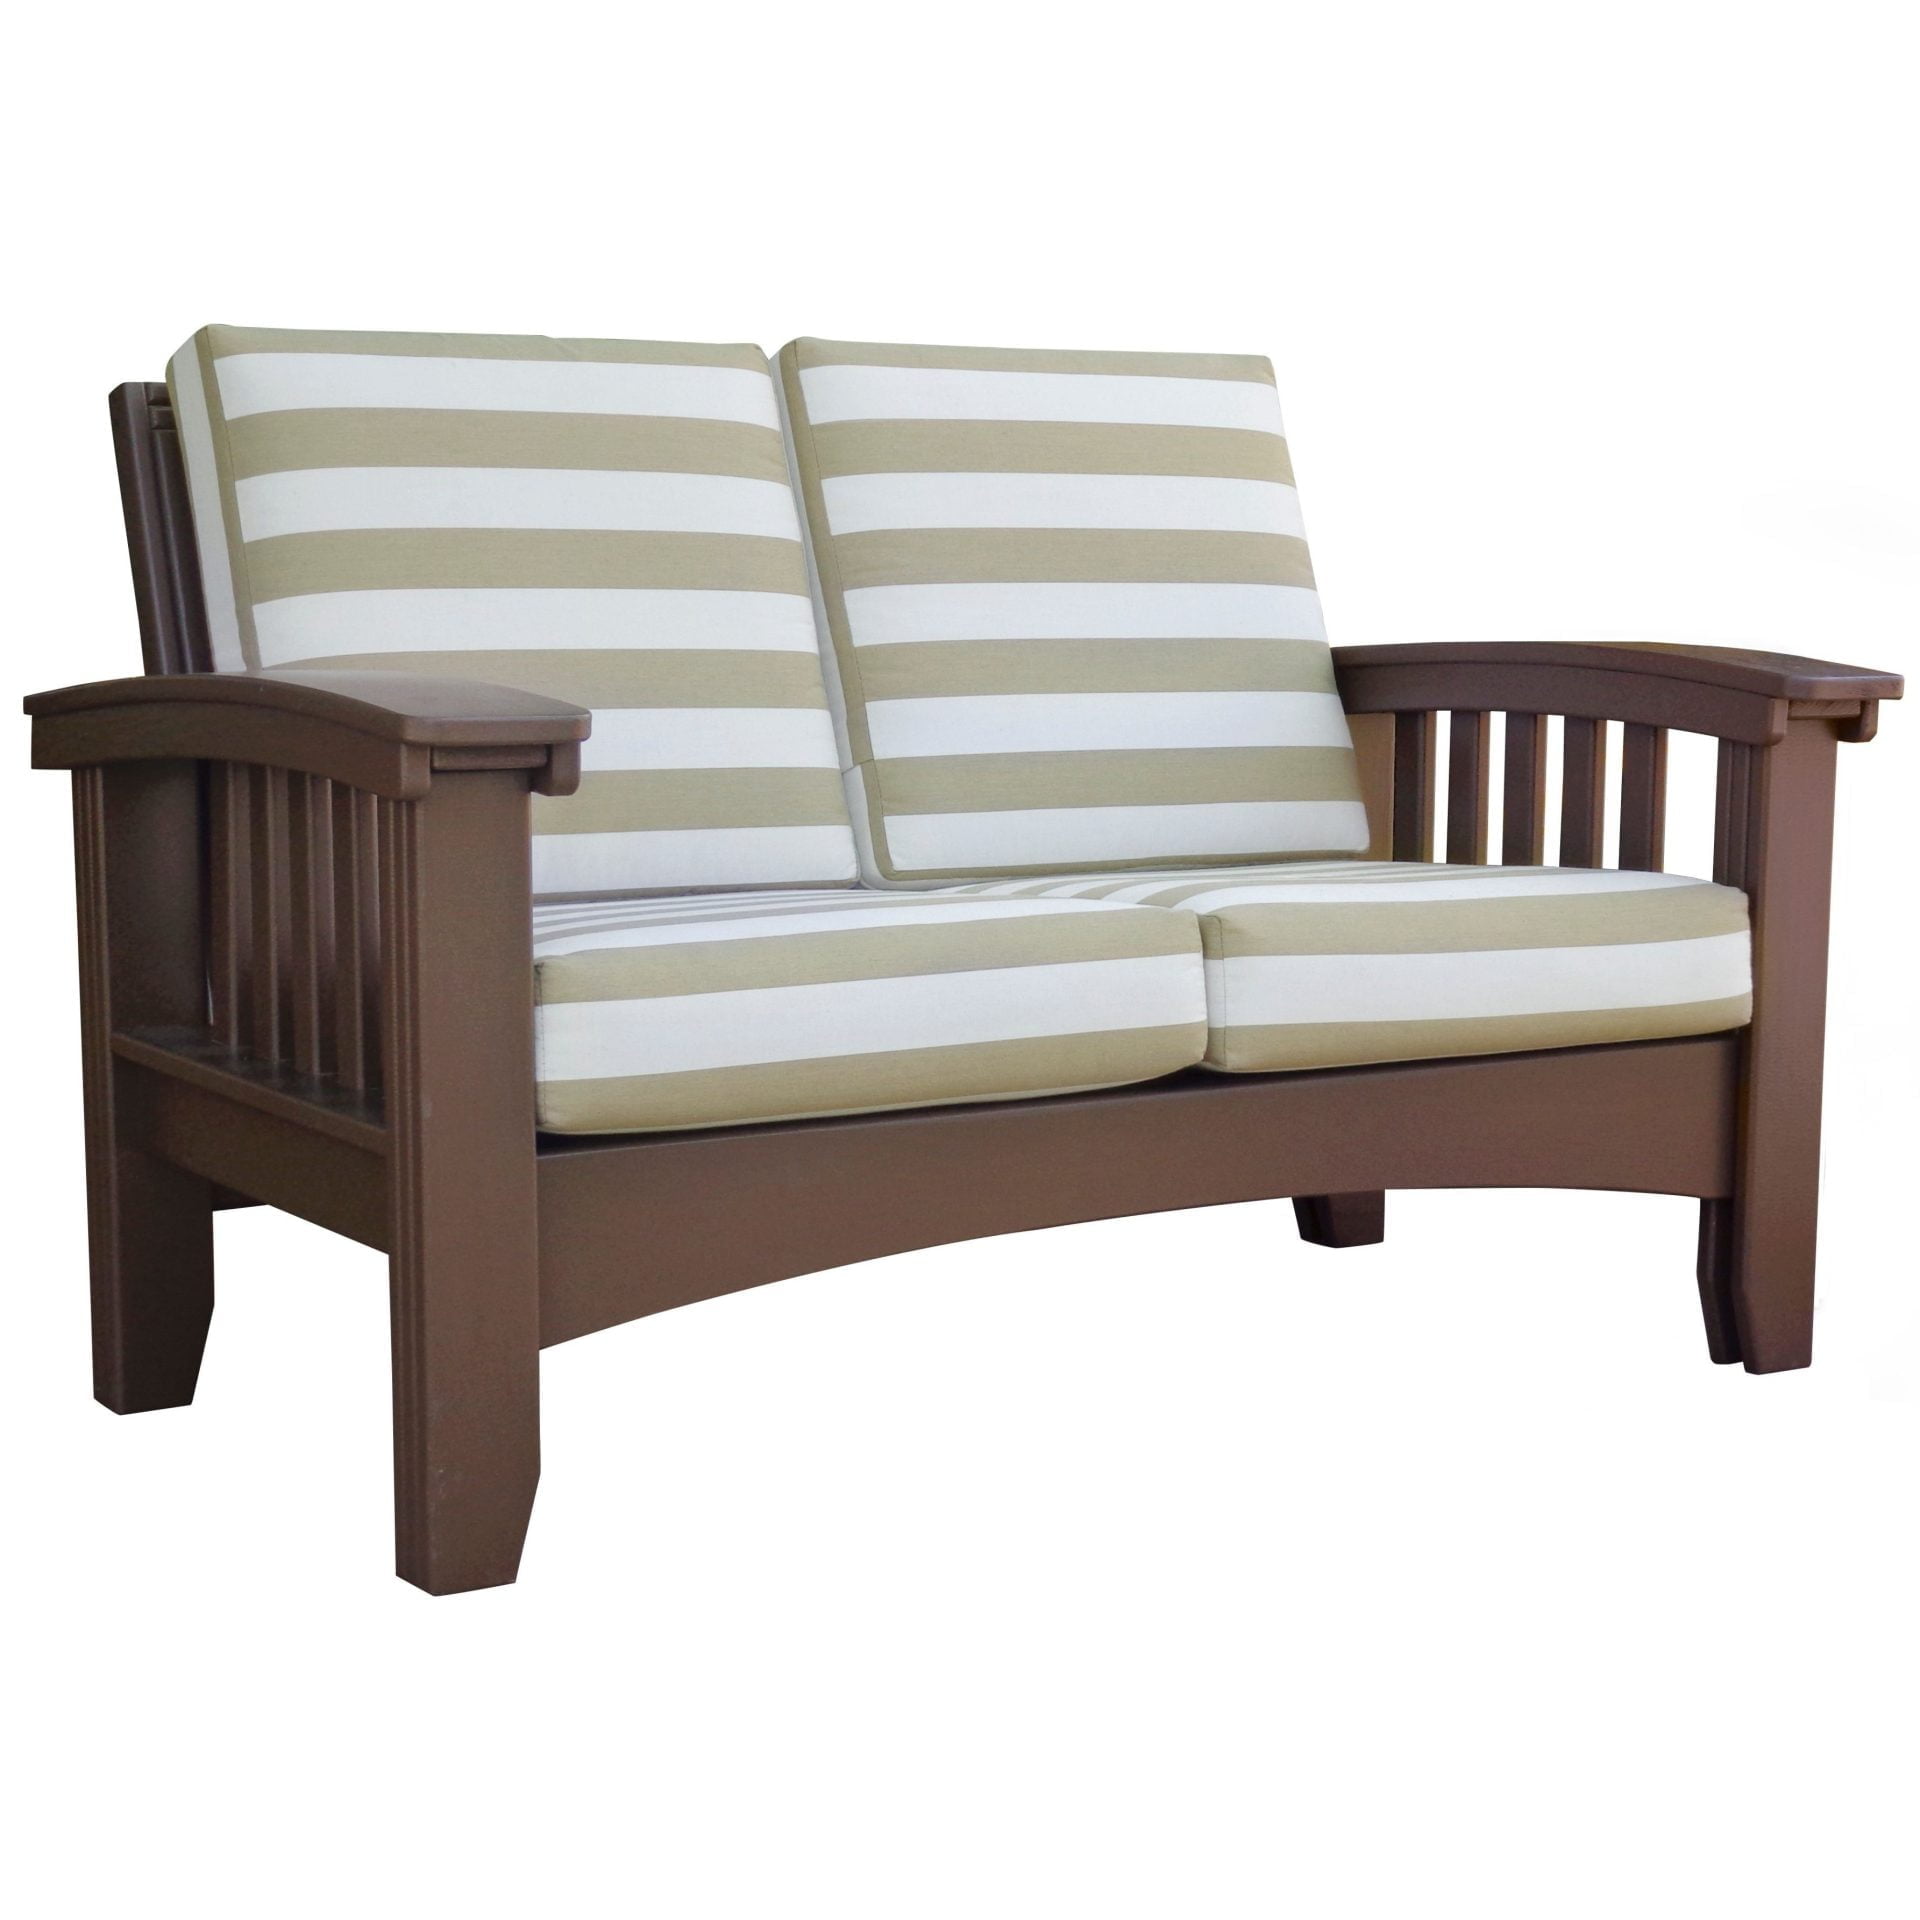 Cypress Mission Style Deep Seat Outdoor Love Seat